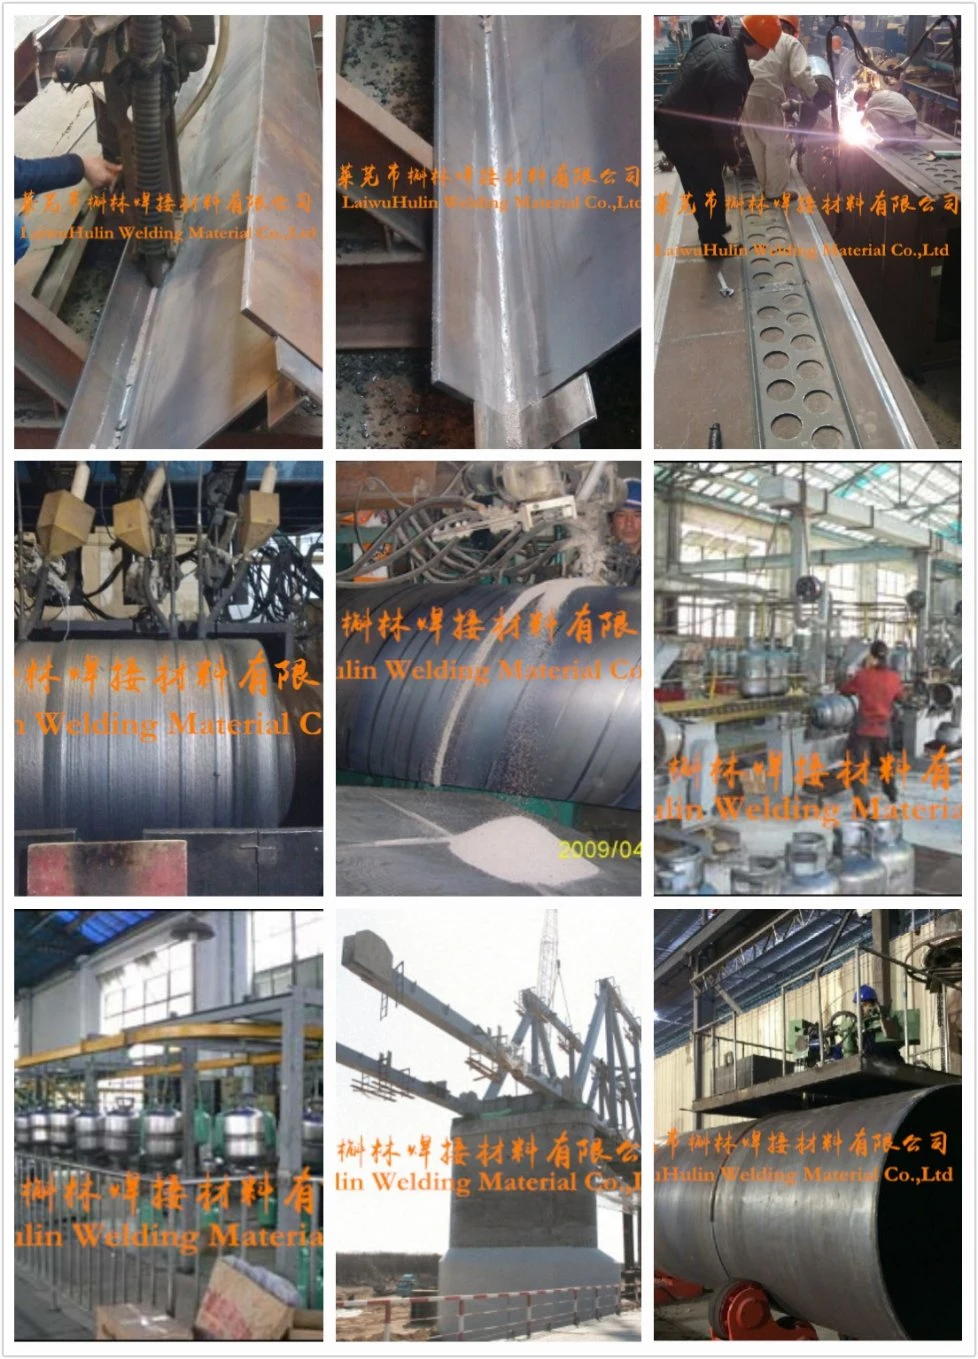 Factory Price Welding Flux & Stainless Steel Wire for Pressure Vessel Hj107